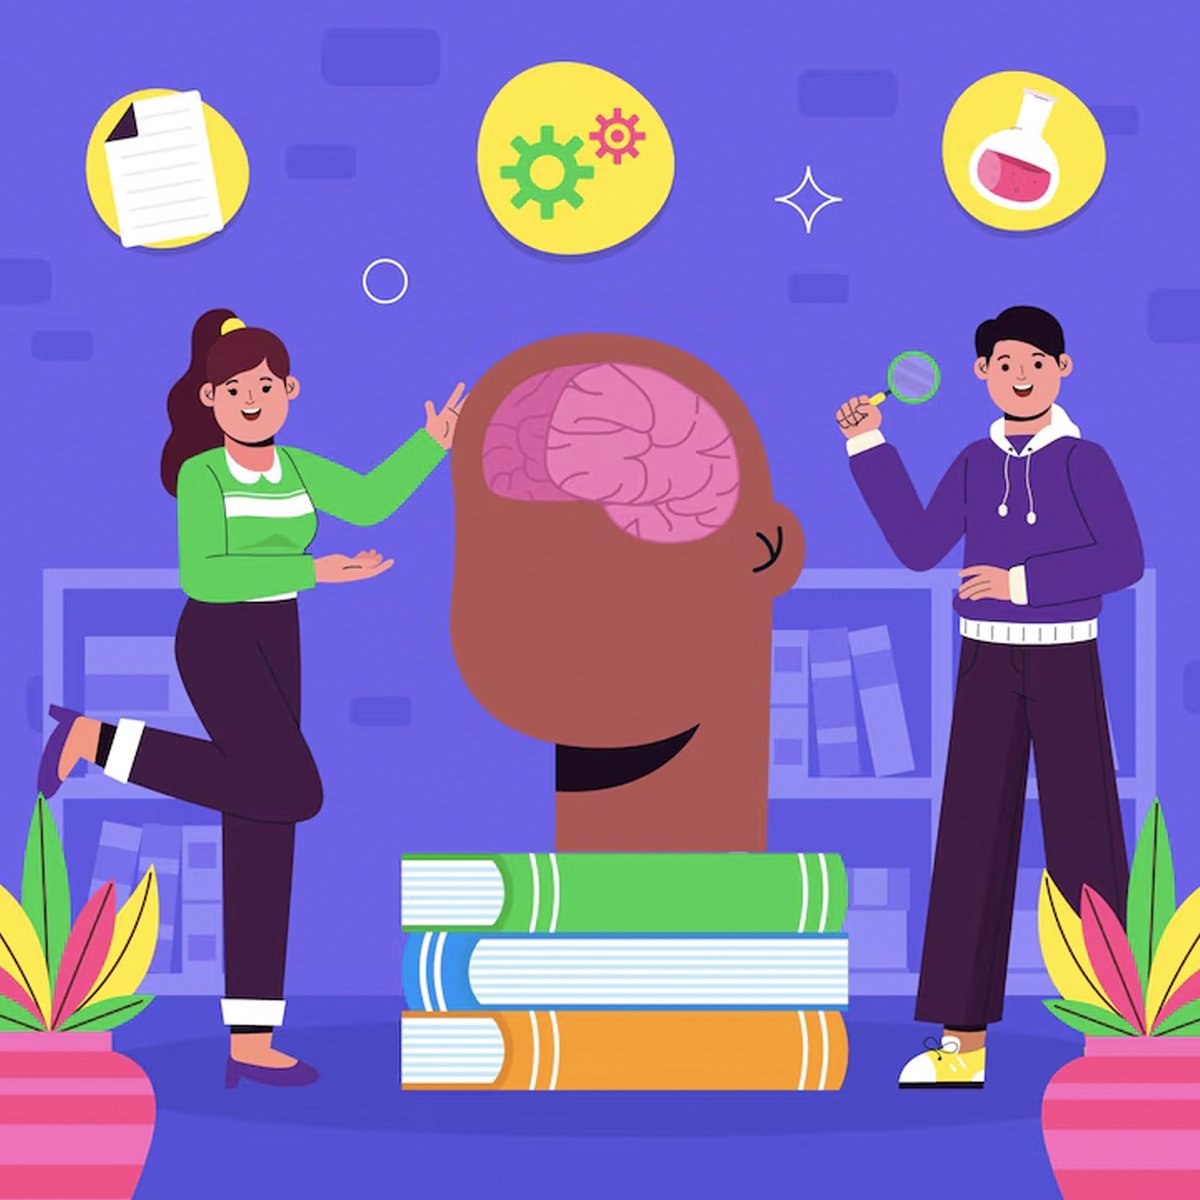 Taking care of your mental health when studying is just as important as hitting the books! 📖 Don't forget to: 1️⃣ Take regular breaks 2️⃣ Stay hydrated 3️⃣ Practice mindfulness 4️⃣ Get moving 5️⃣ Reach out for support